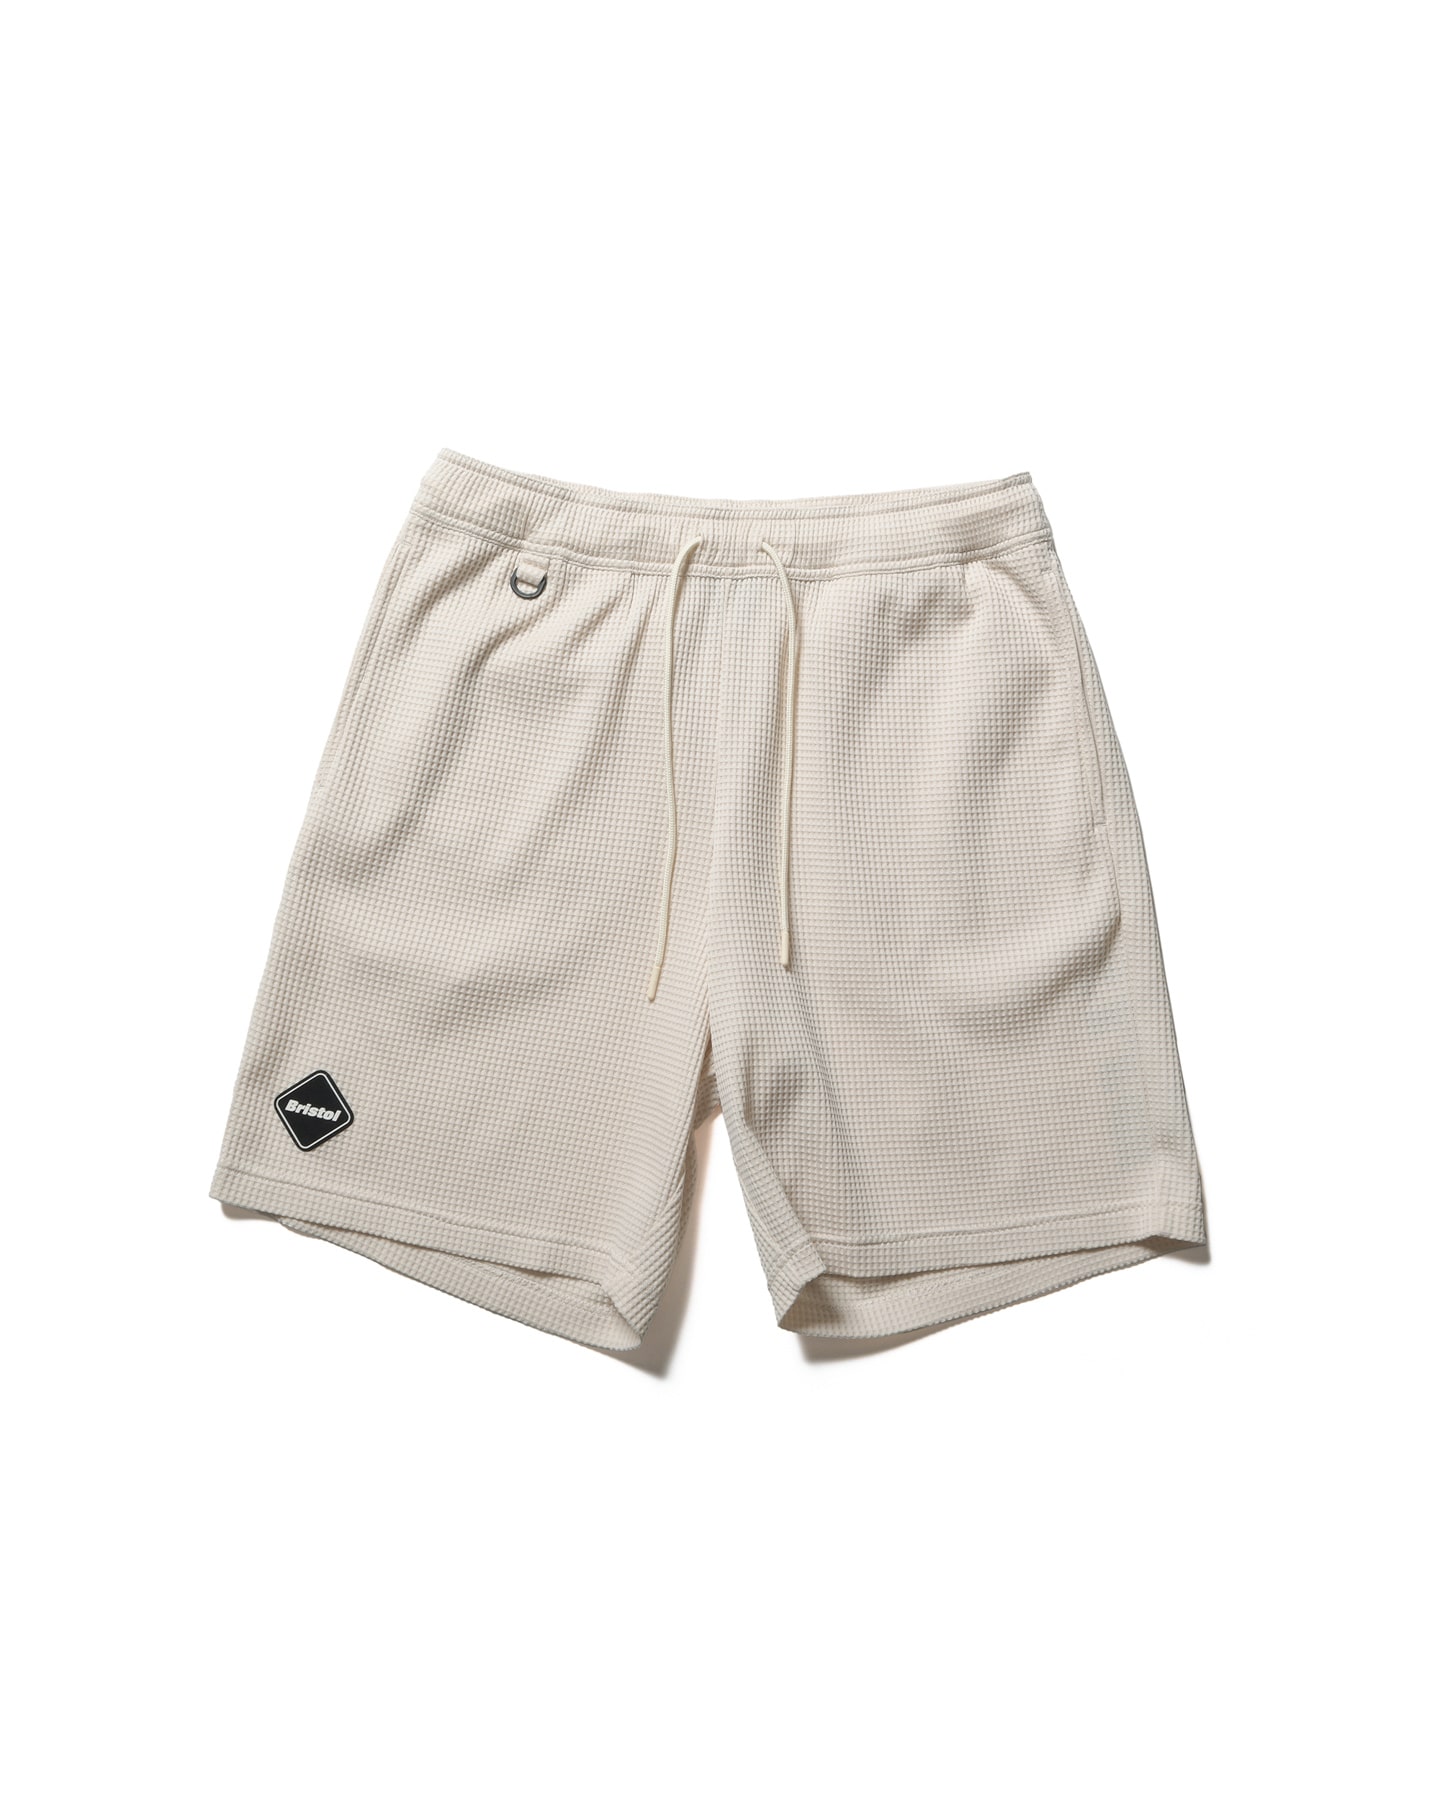 TECH WAFFLE TEAM RELAX SHORTS(XL OFF WHITE) - SOPH.